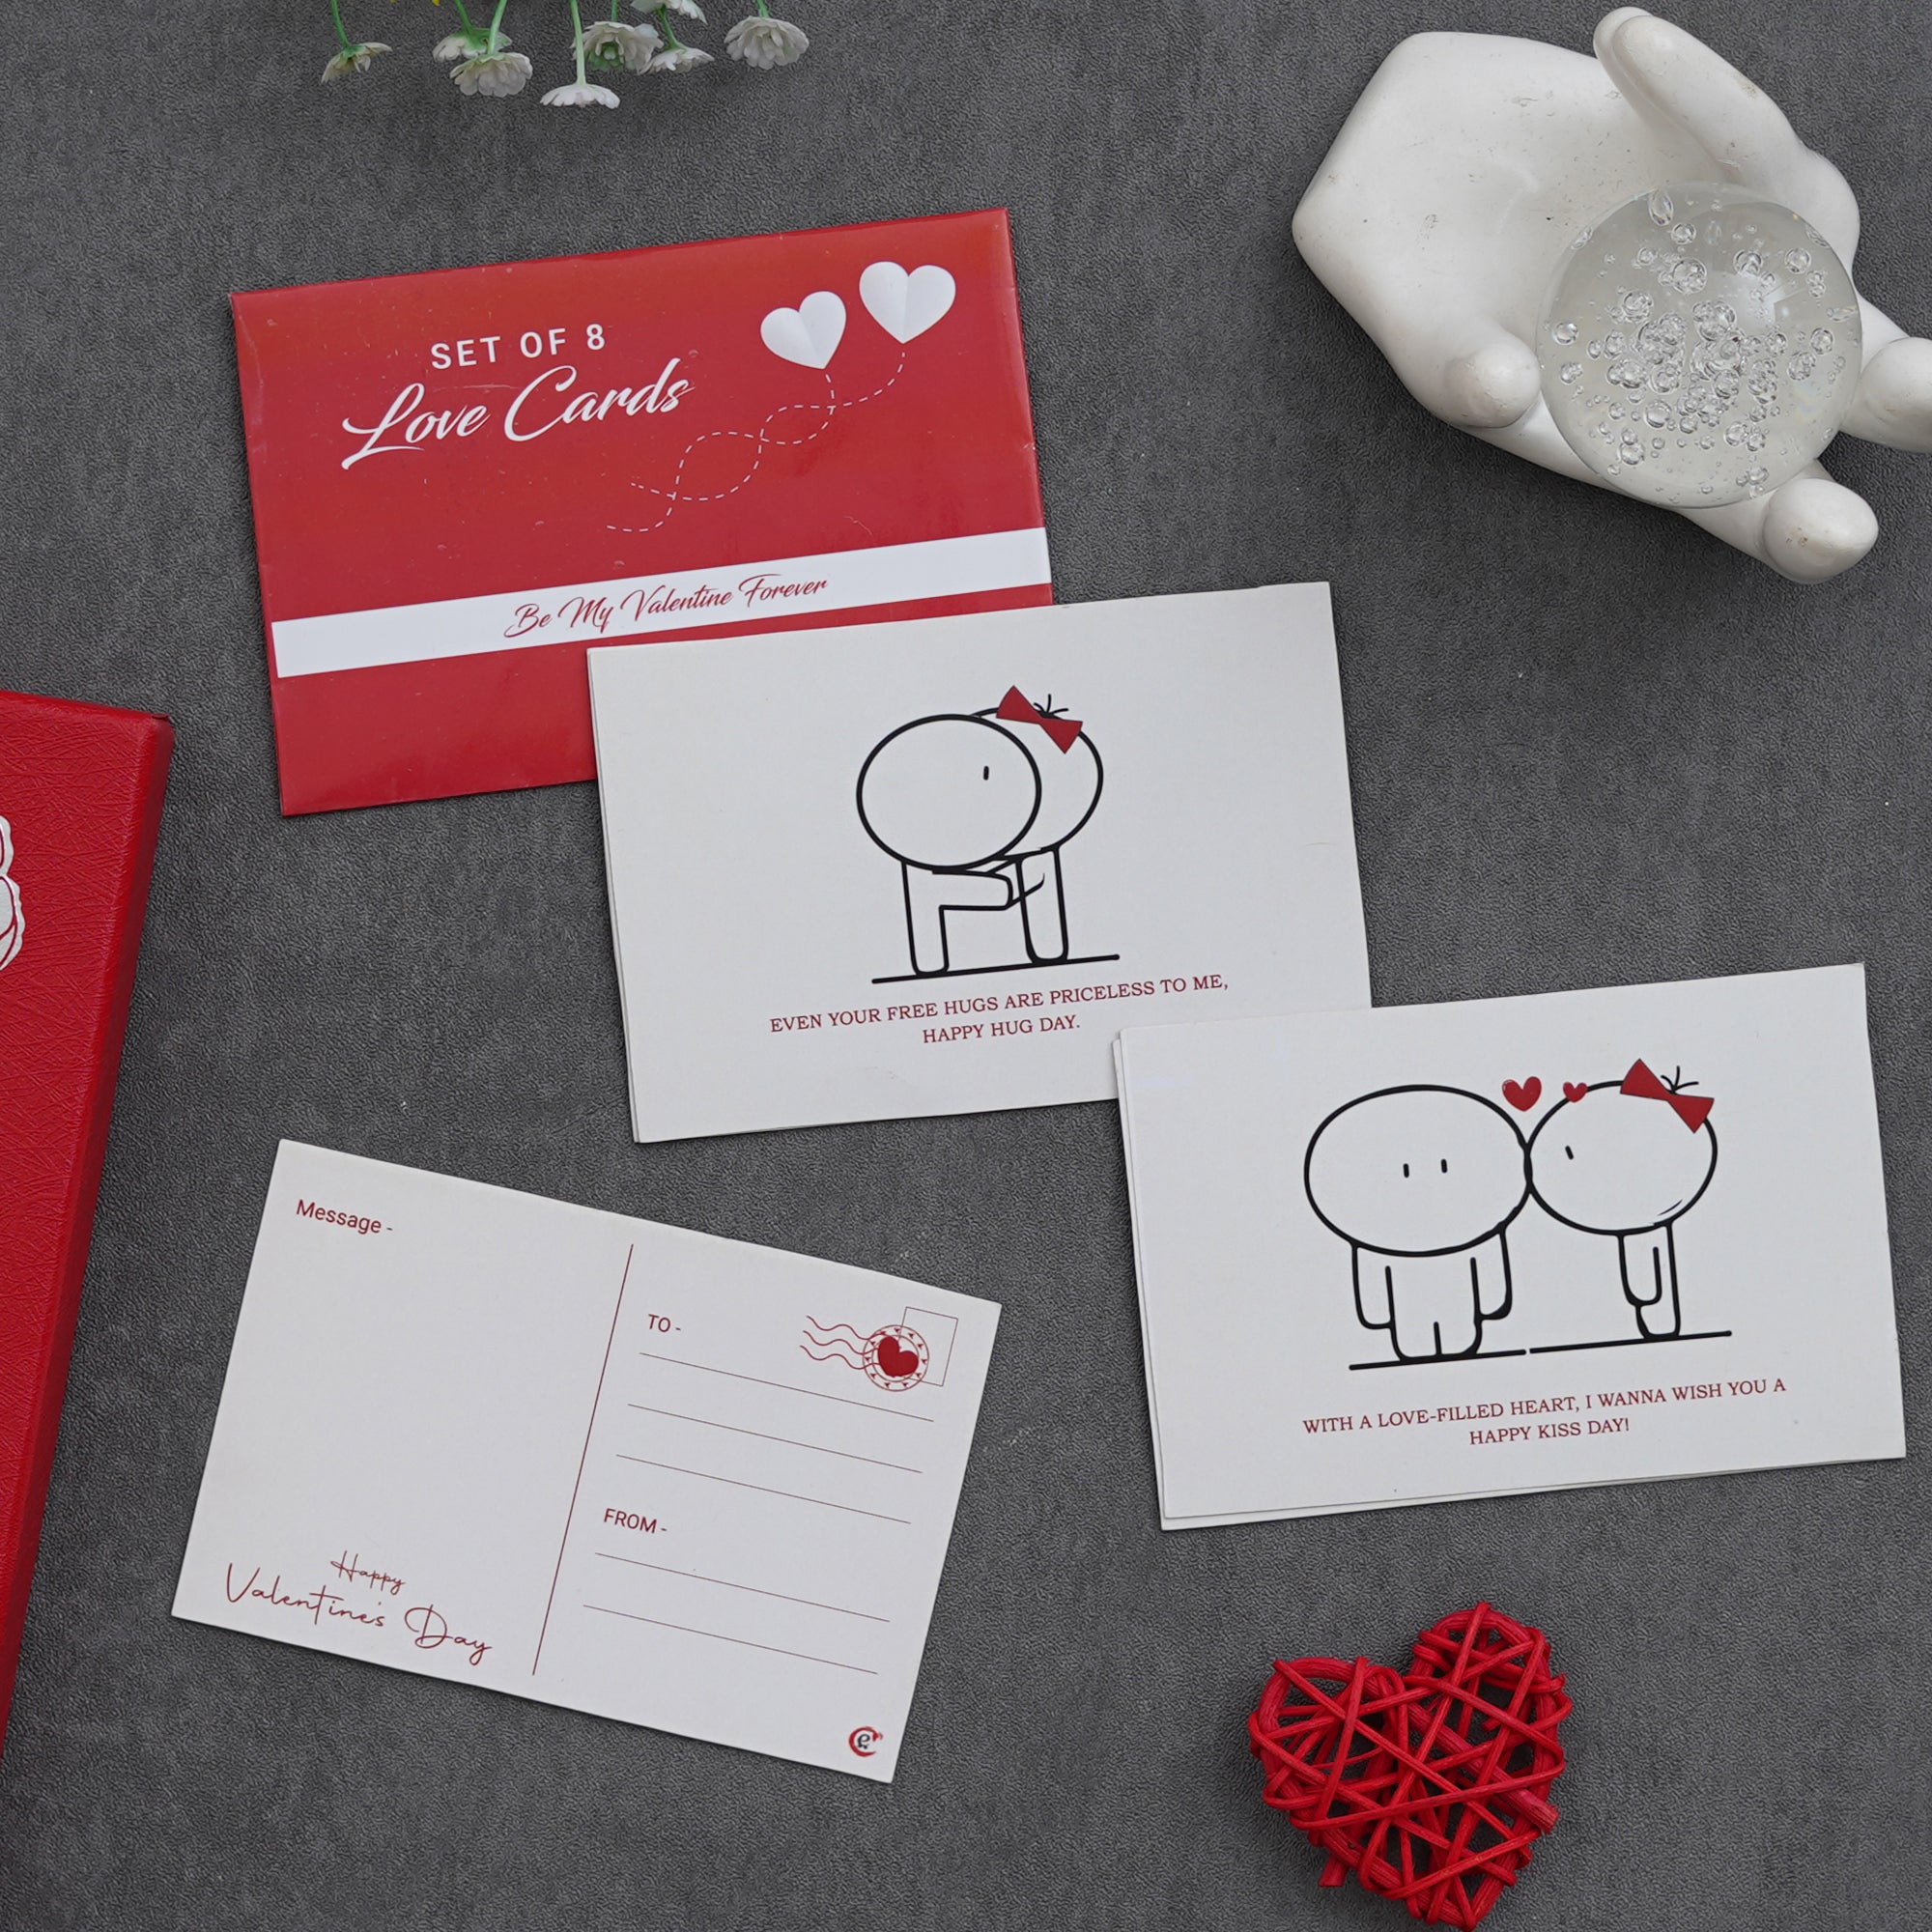 Valentine Combo of Set of 8 Love Post Cards Gift Cards Set, Golden Rose Gift Set, Heart Shaped Gift Box Set with White Teddy and Red Roses 1